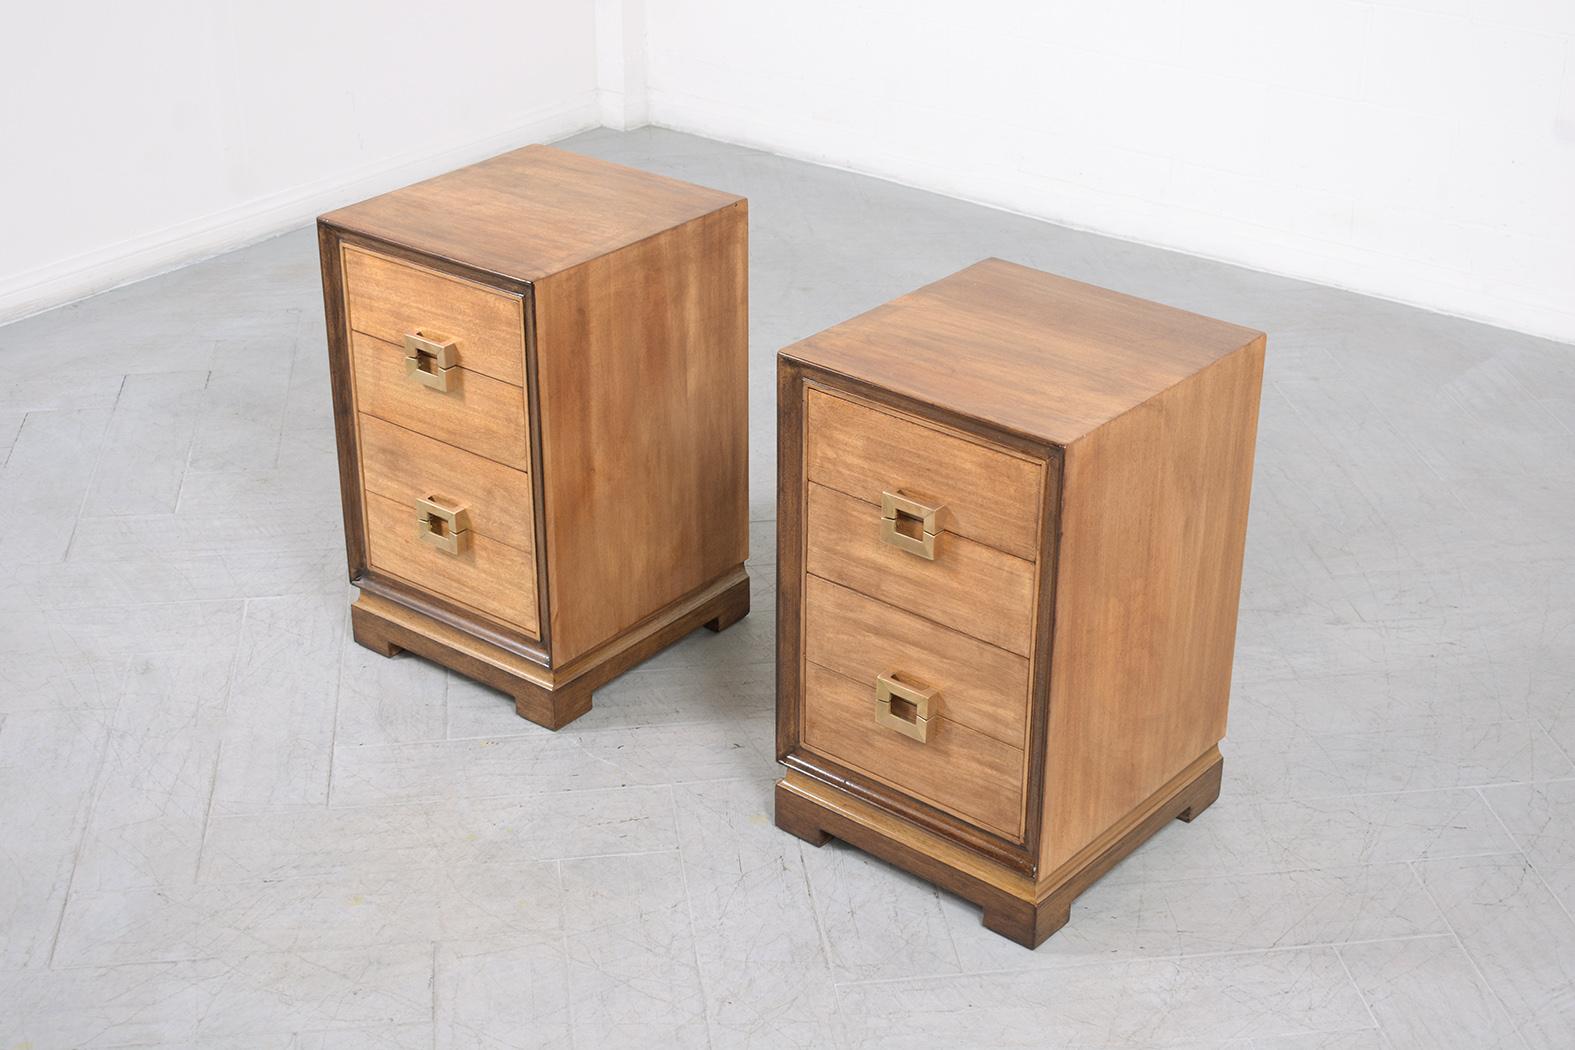 An extraordinary pair of vintage 1960s mid-century modern nightstands that are in great condition beautifully crafted out of wood that has been completely restored by our in-house professional craftsmen team. This sleek pair of 1960s bedside tables